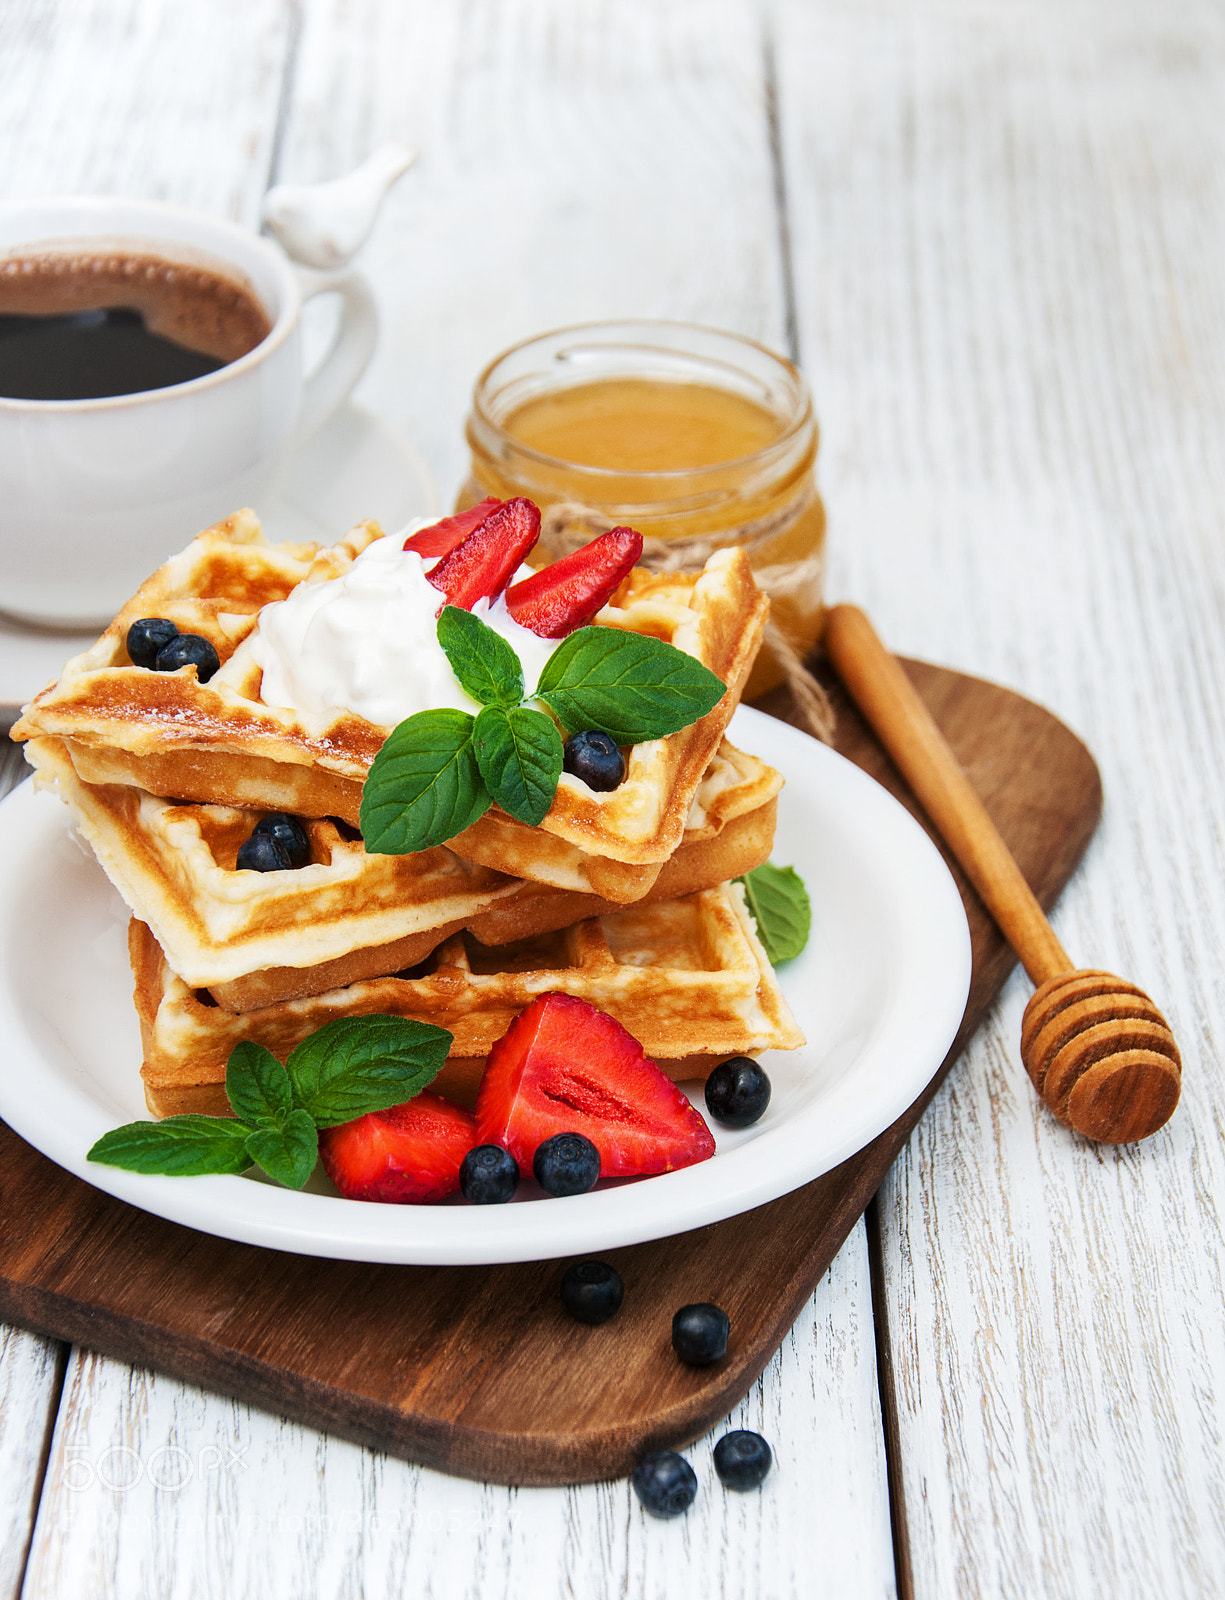 Nikon D90 sample photo. Waffles with strawberries, blueberry photography